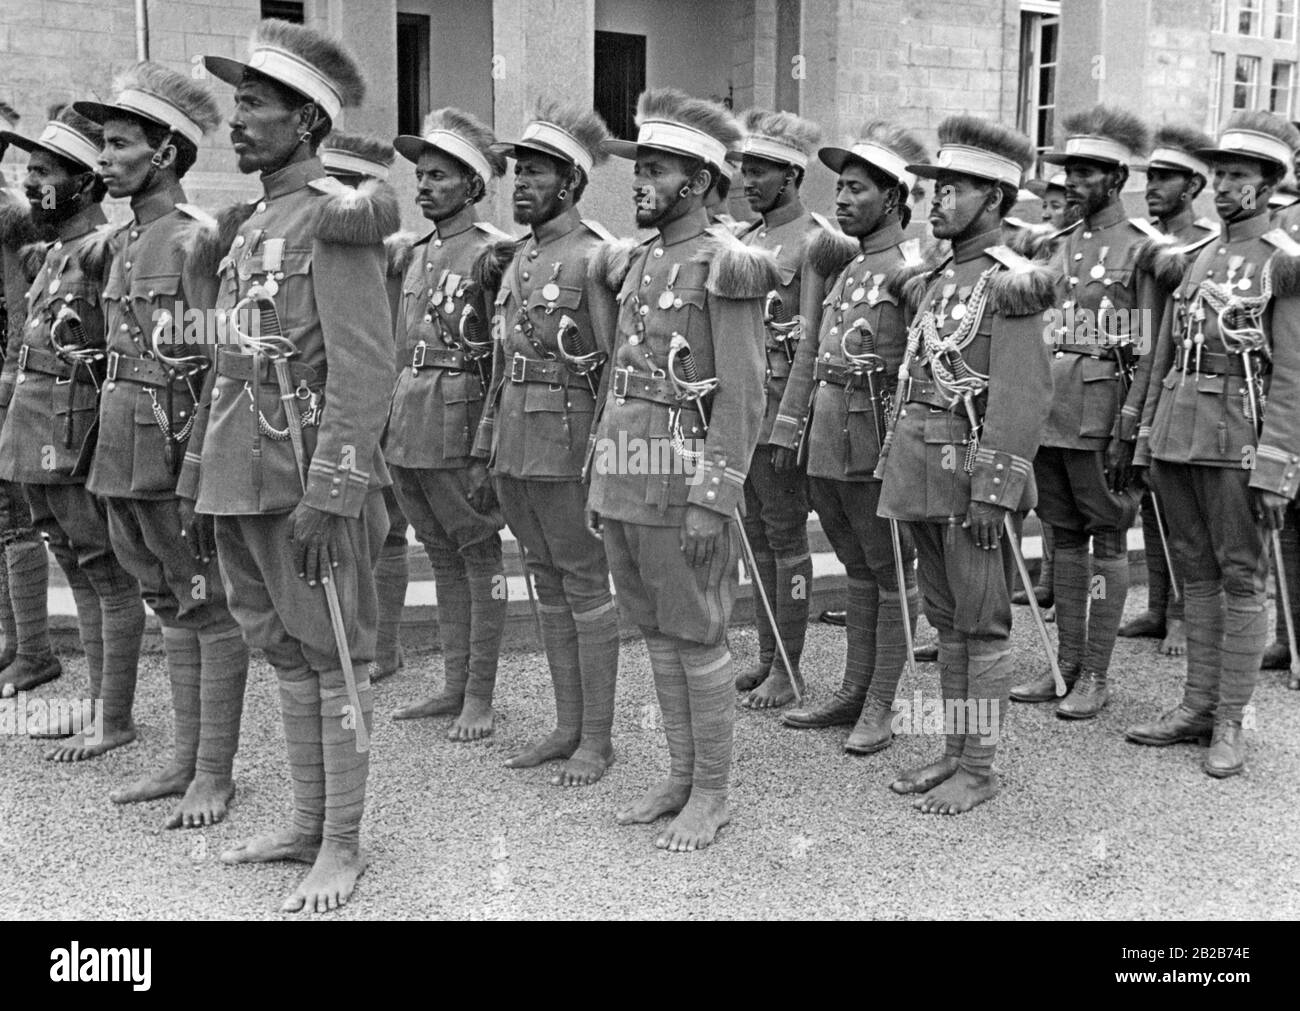 Abyssinian troops deployed in the war against Italy. They wear European-style uniforms but remain barefoot. Stock Photo